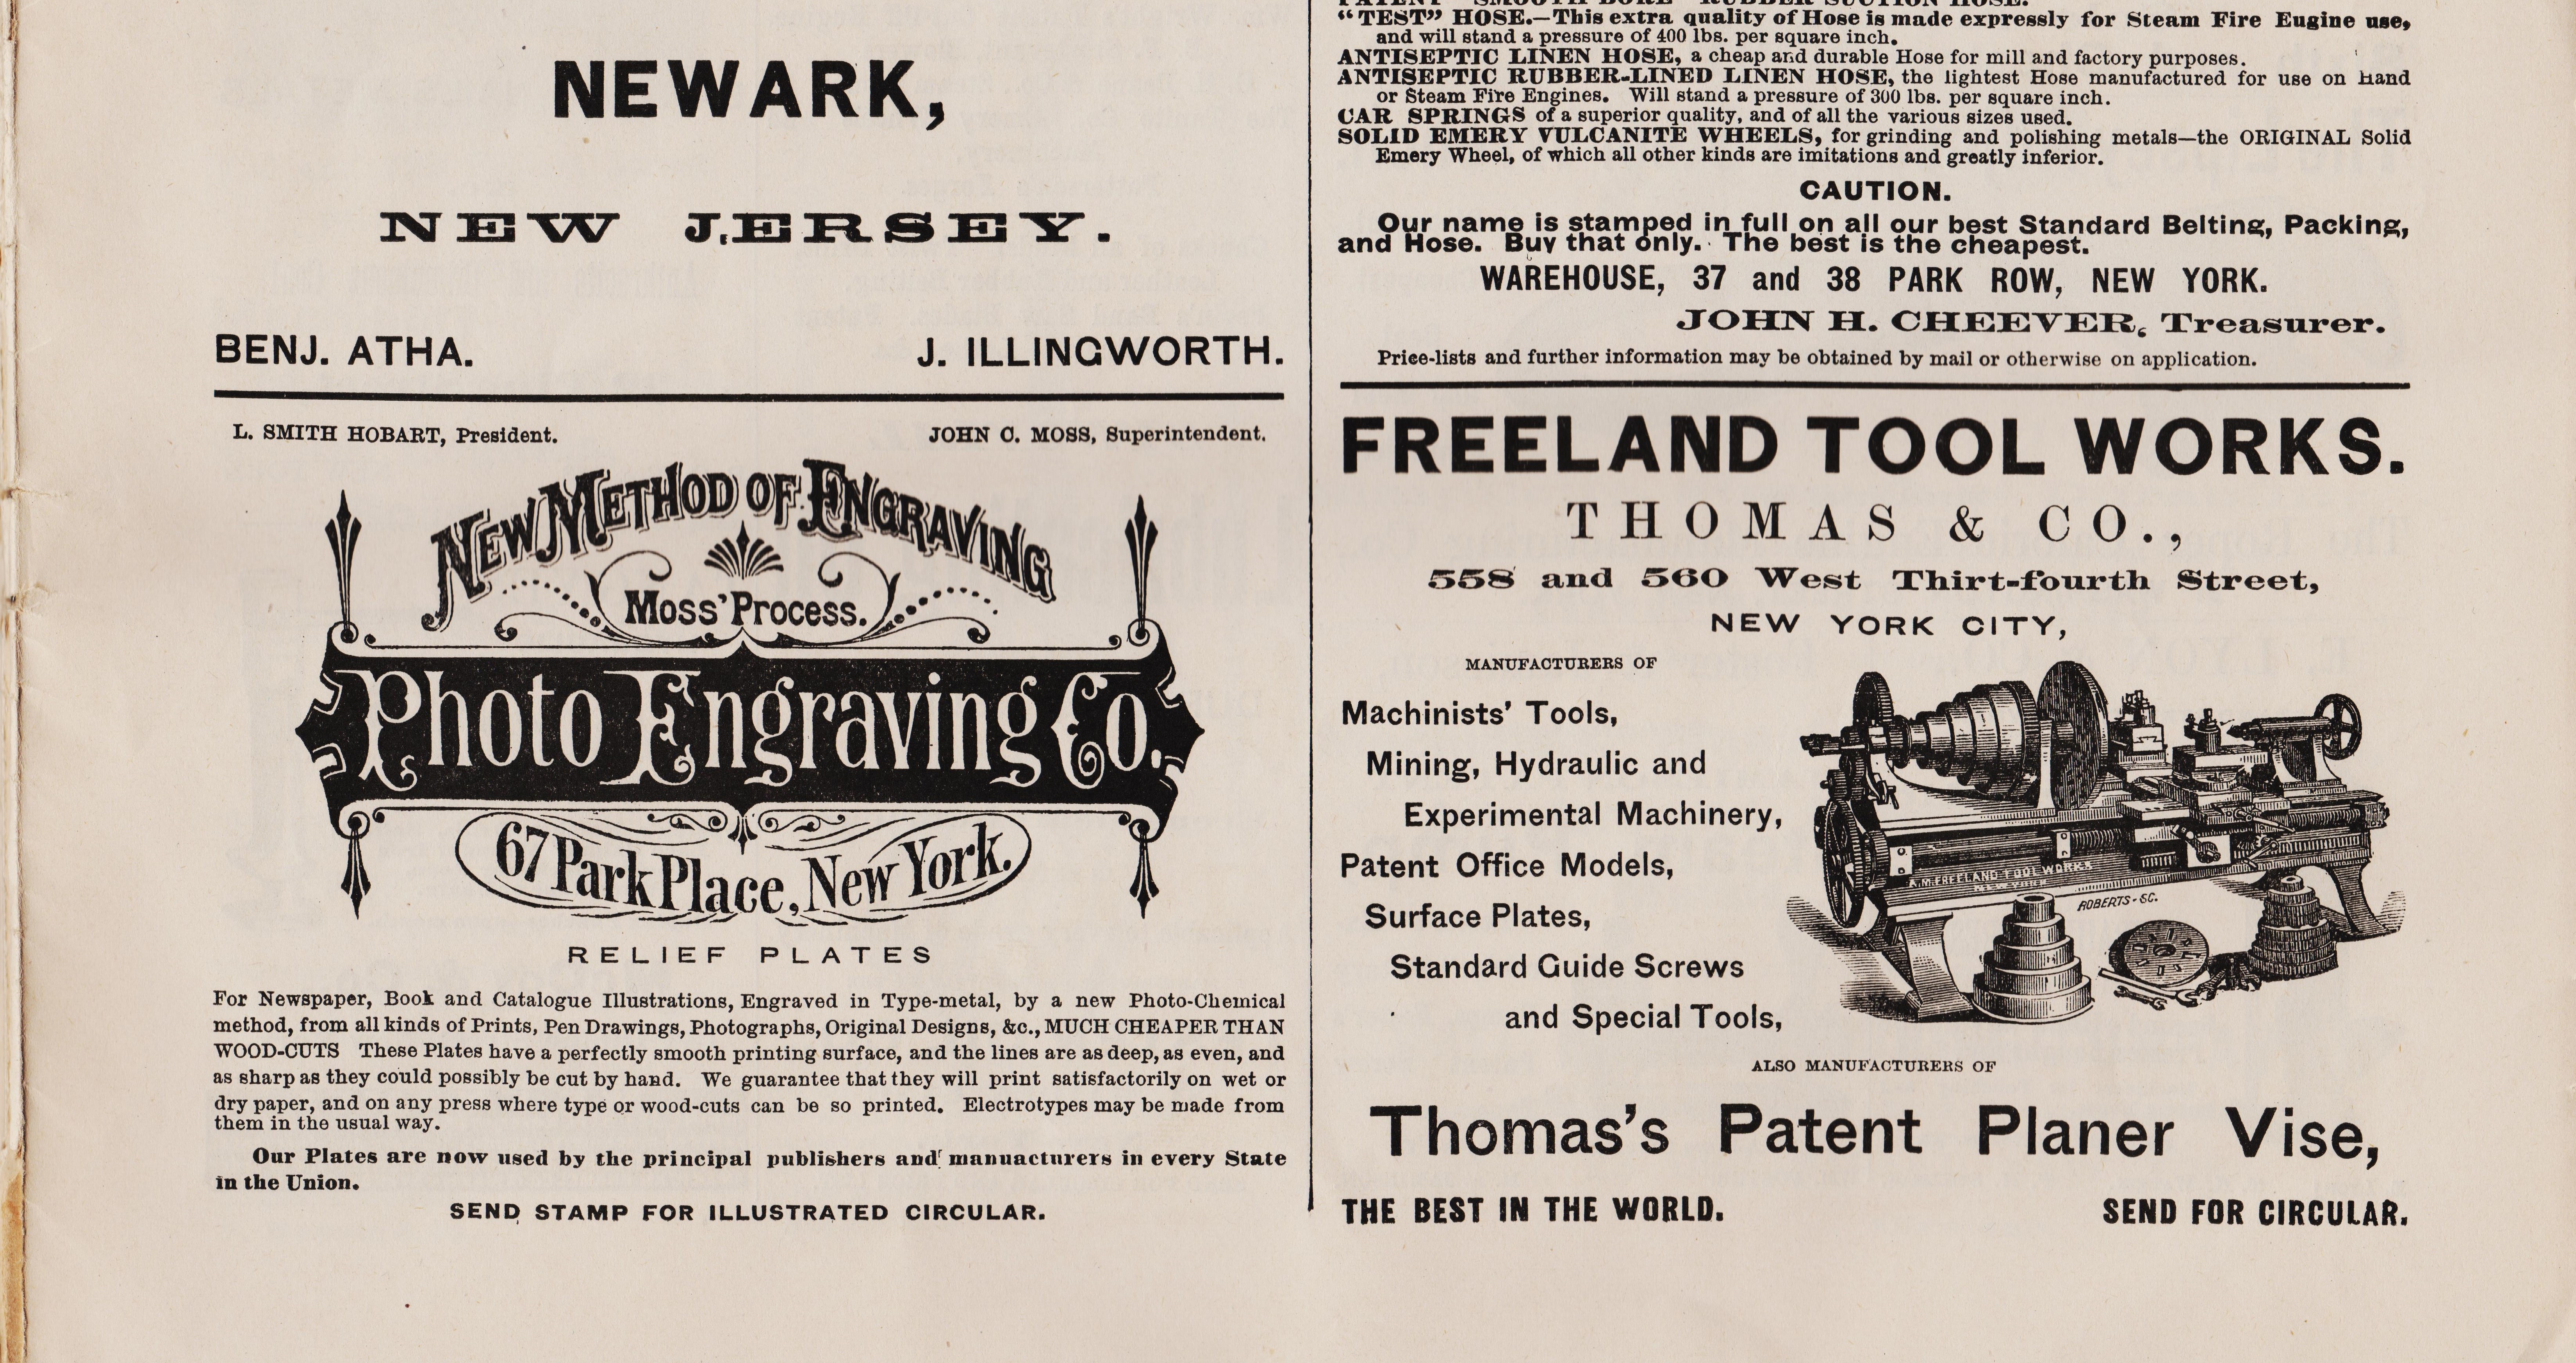 https://antiquemachinery.com/images-2020/American_Machinist-March-15-1894-page-17-bot-Ads.jpg